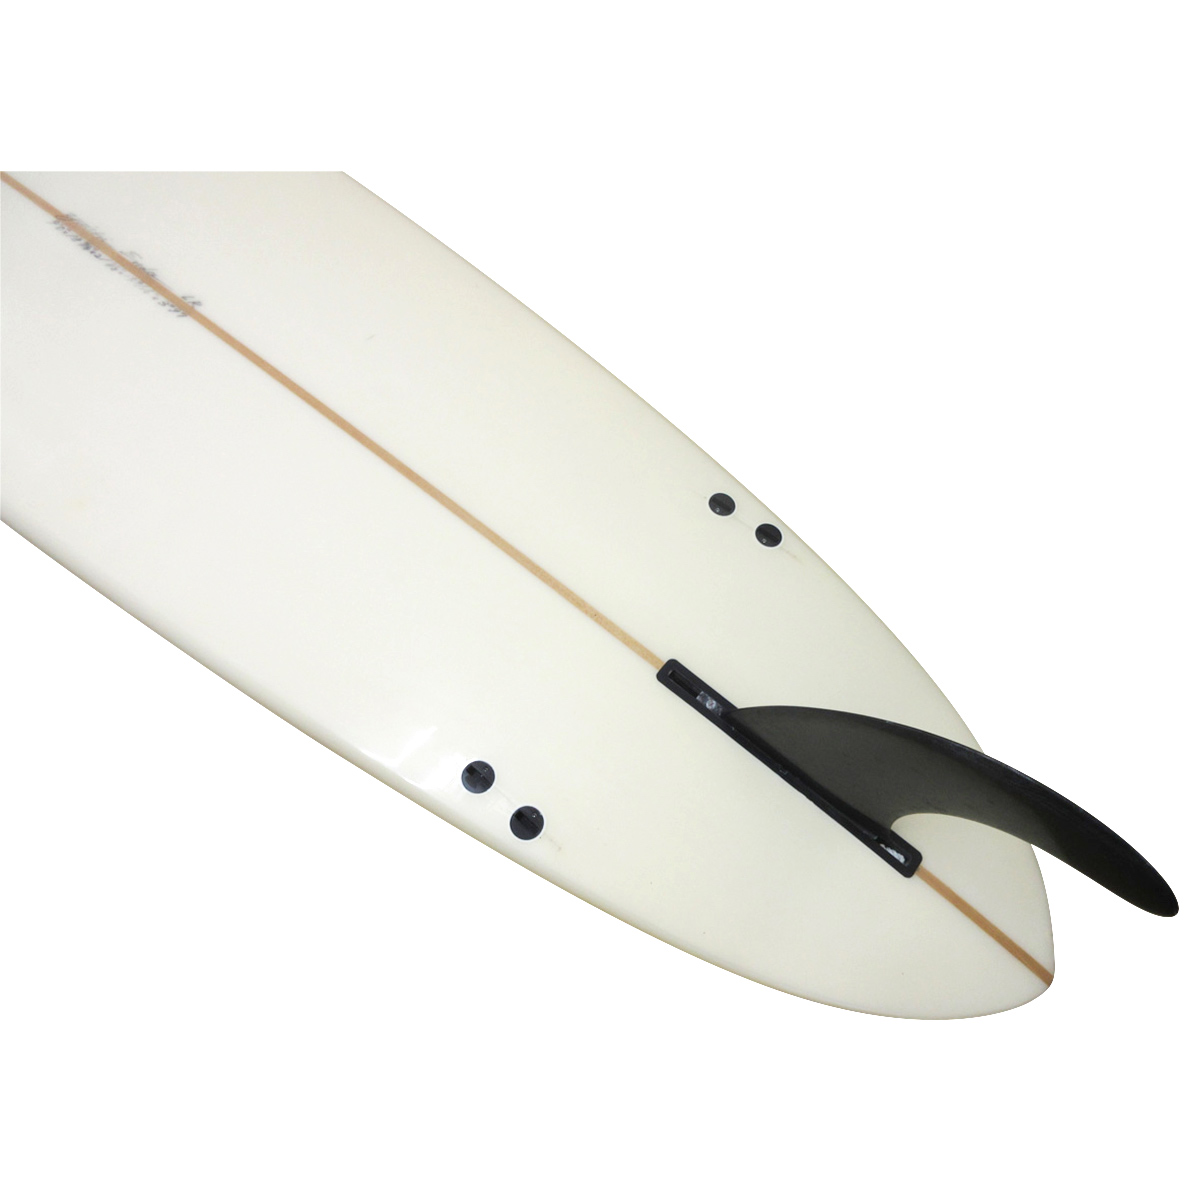 GEAR`S SURFBOARDS / LR 9`0 Shaped by Yuichi Endo